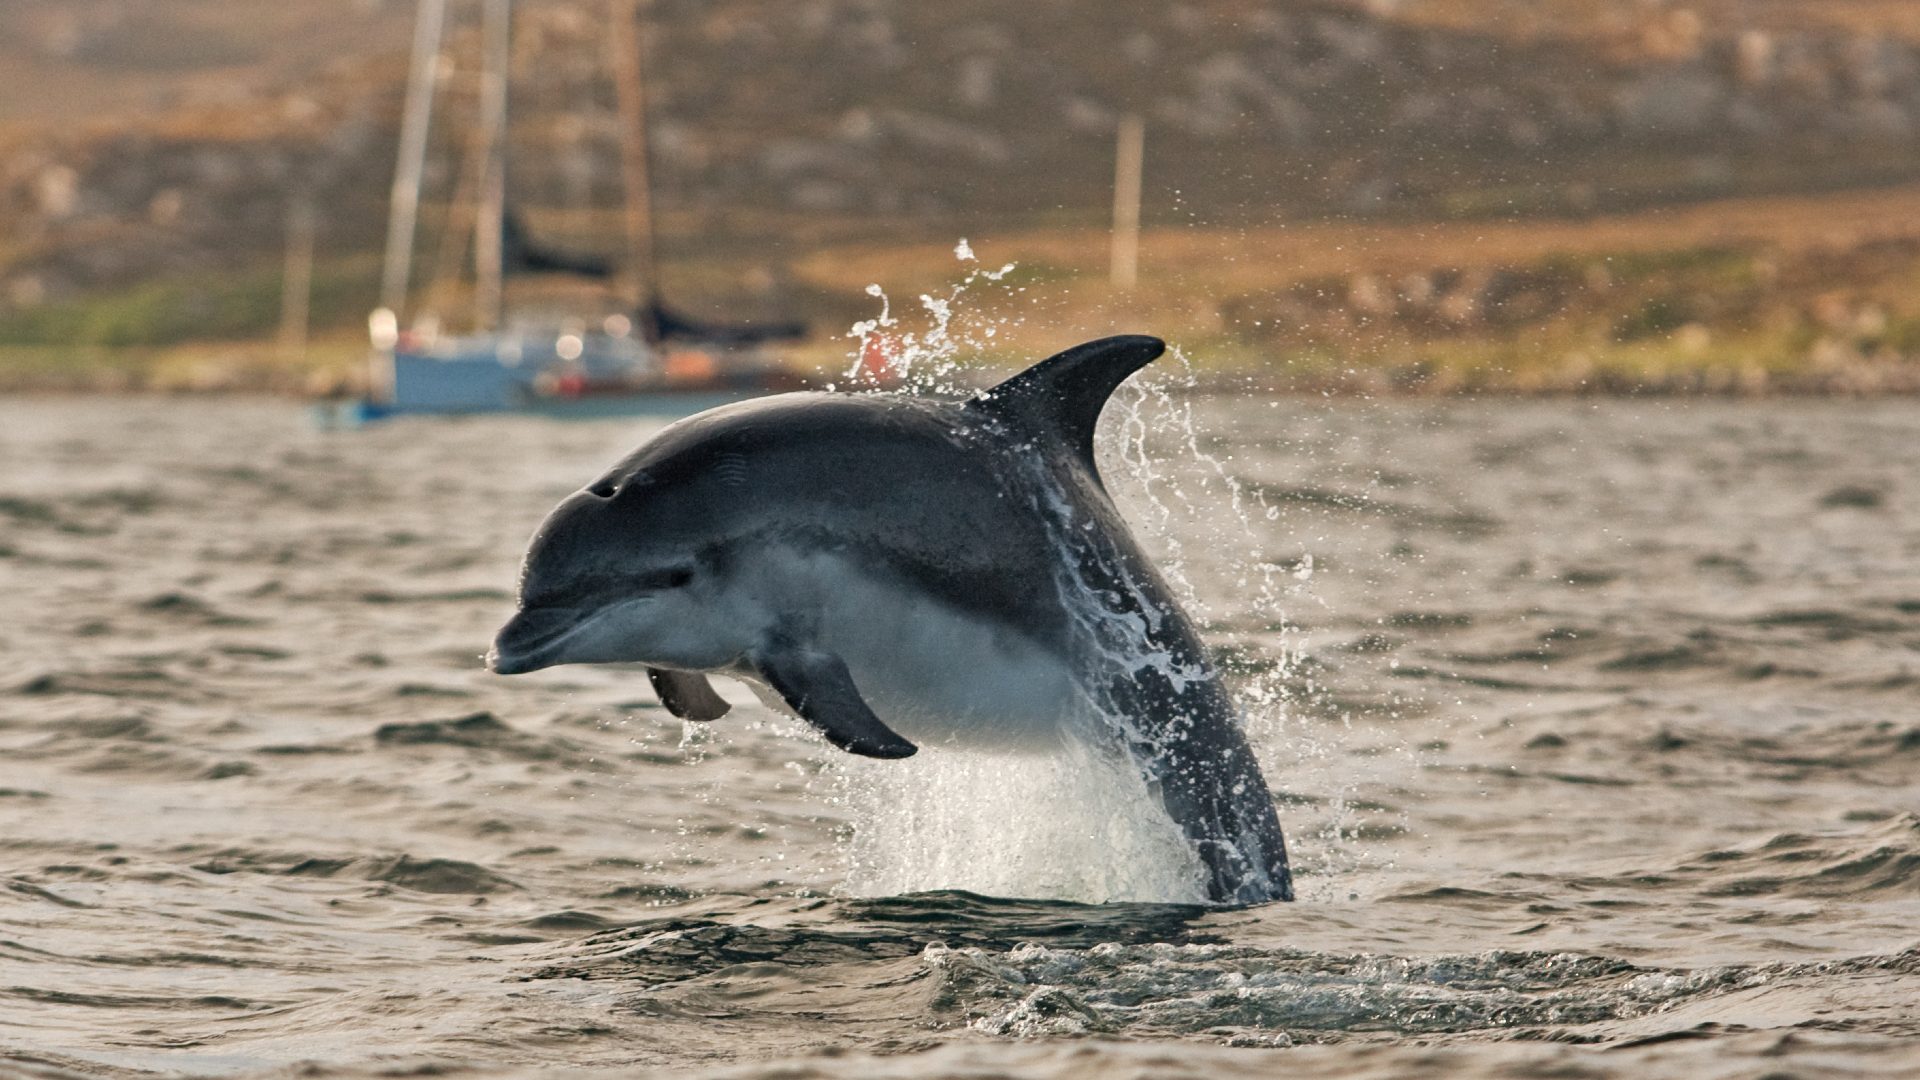 Dolphin leaping out of the water, Scotland